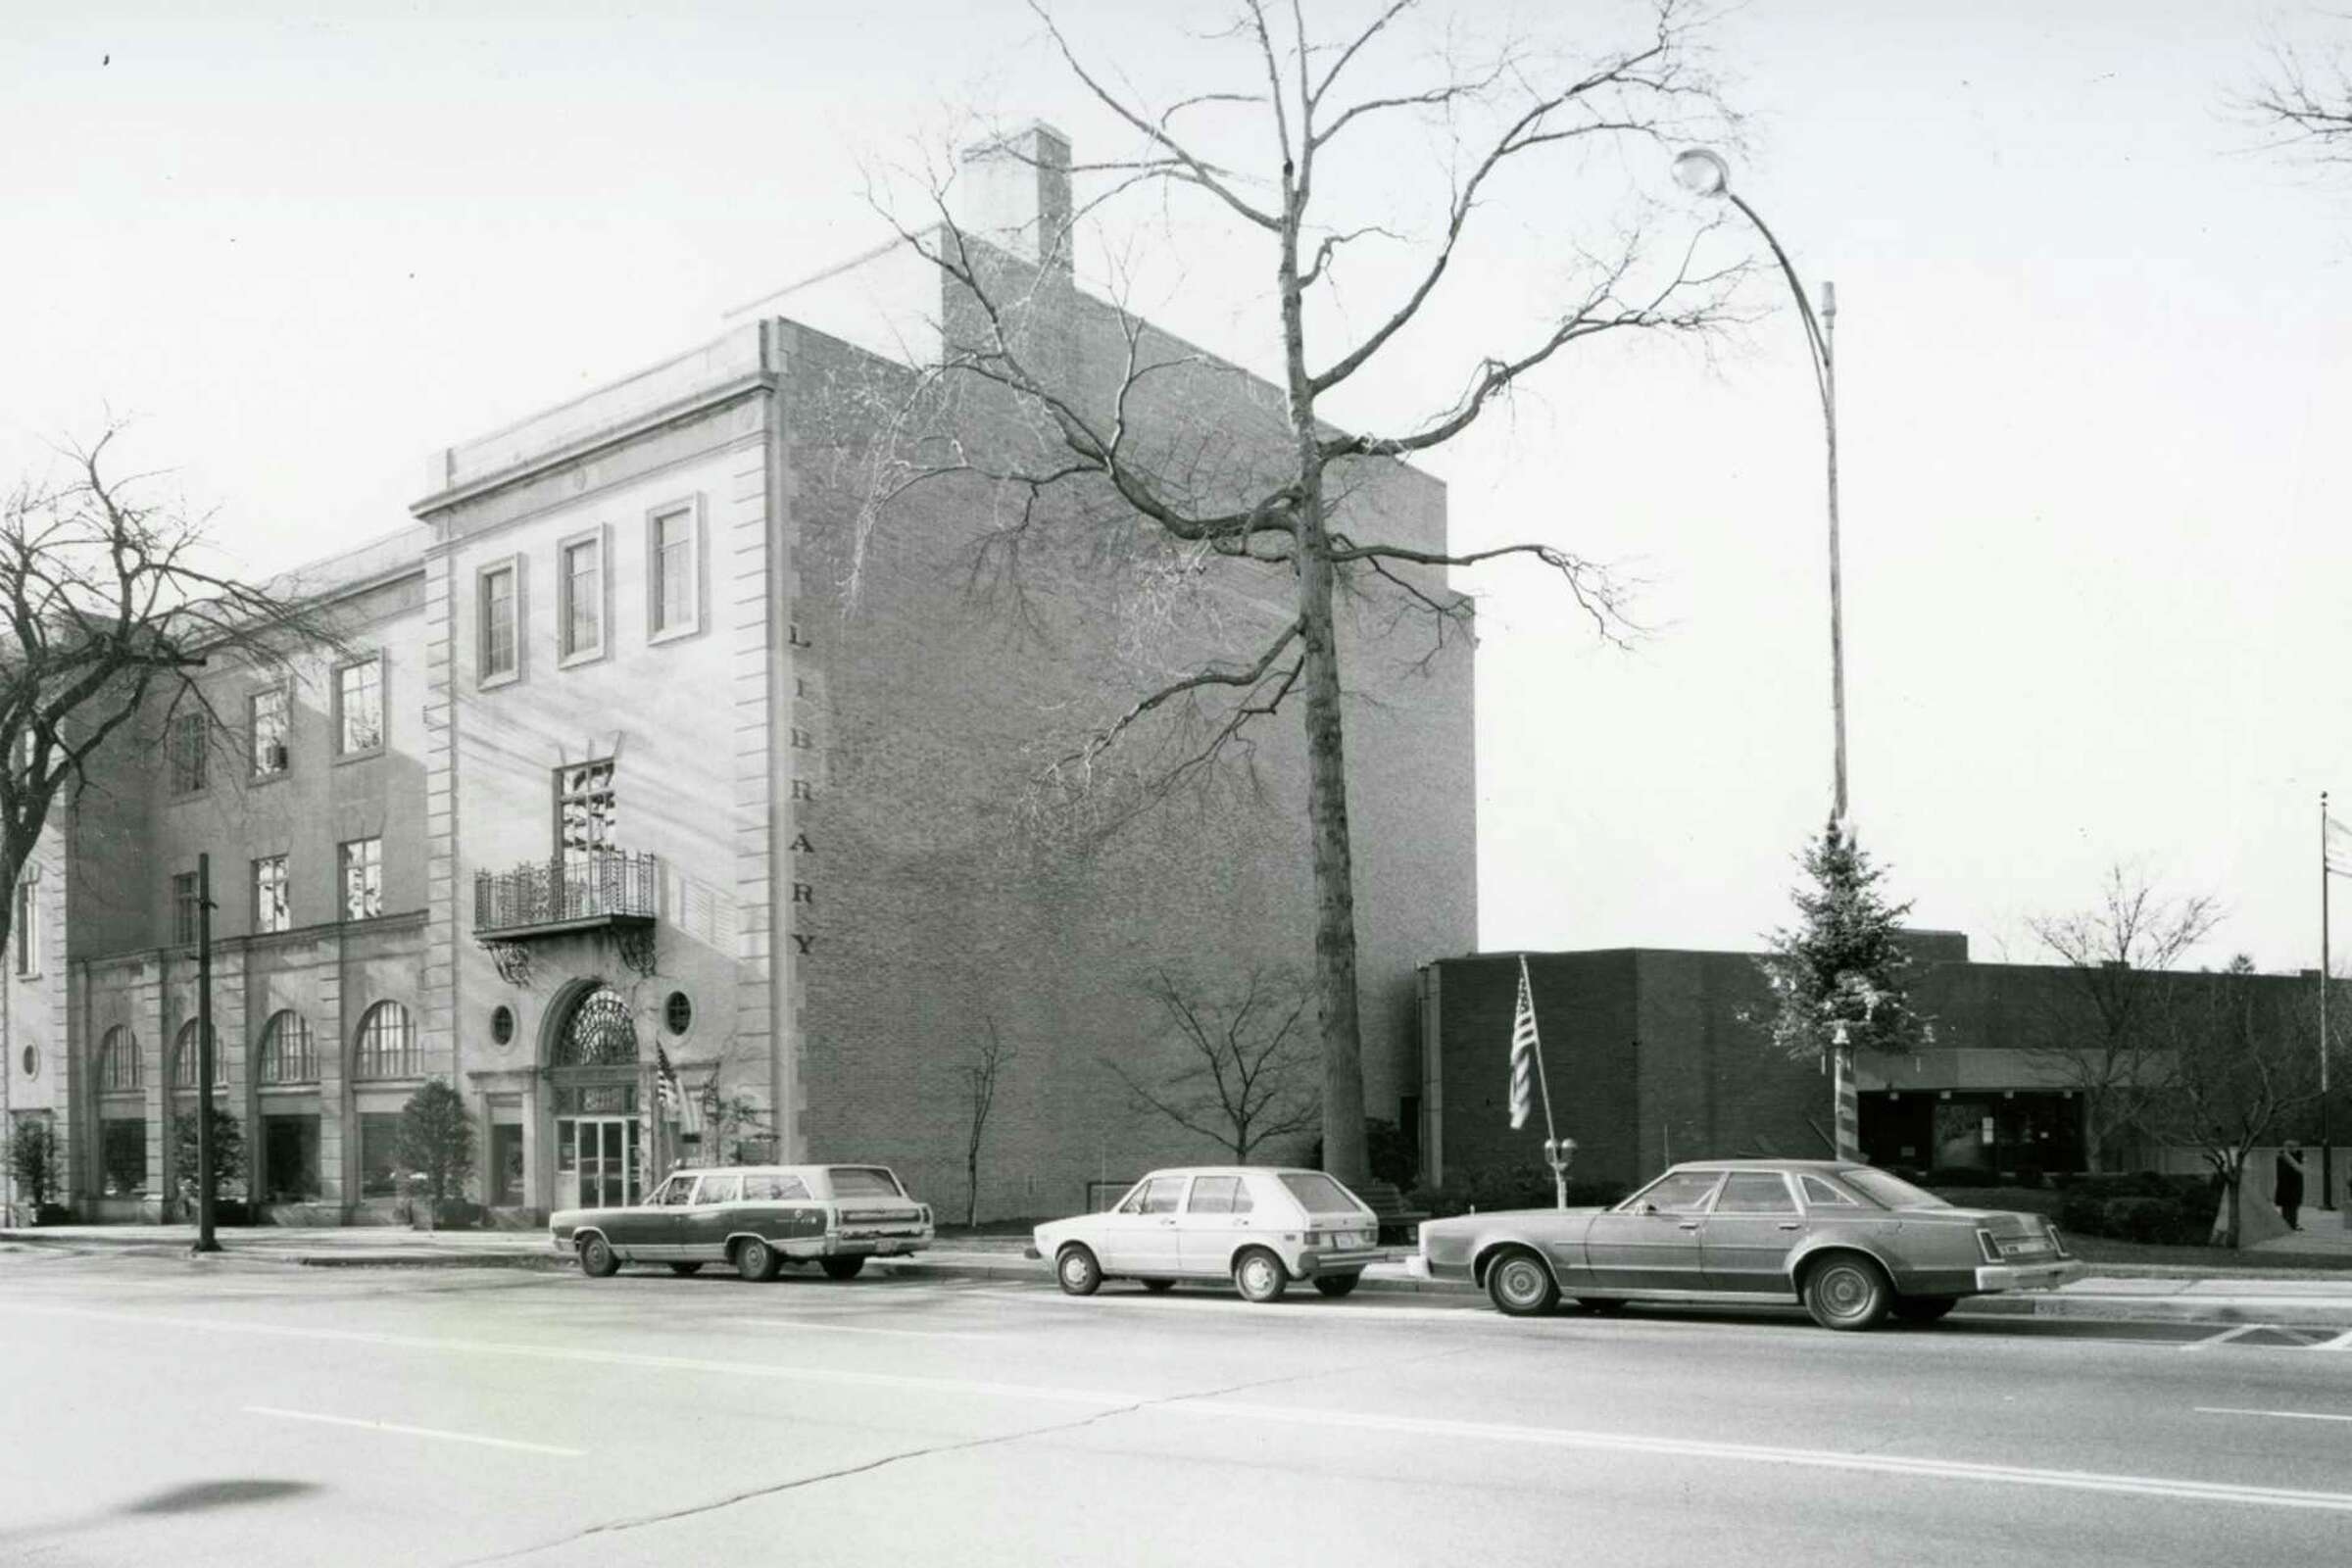 A historic image of Greenwich Library on West Putnam Avenue featuring the pin oak tree with no leaves.